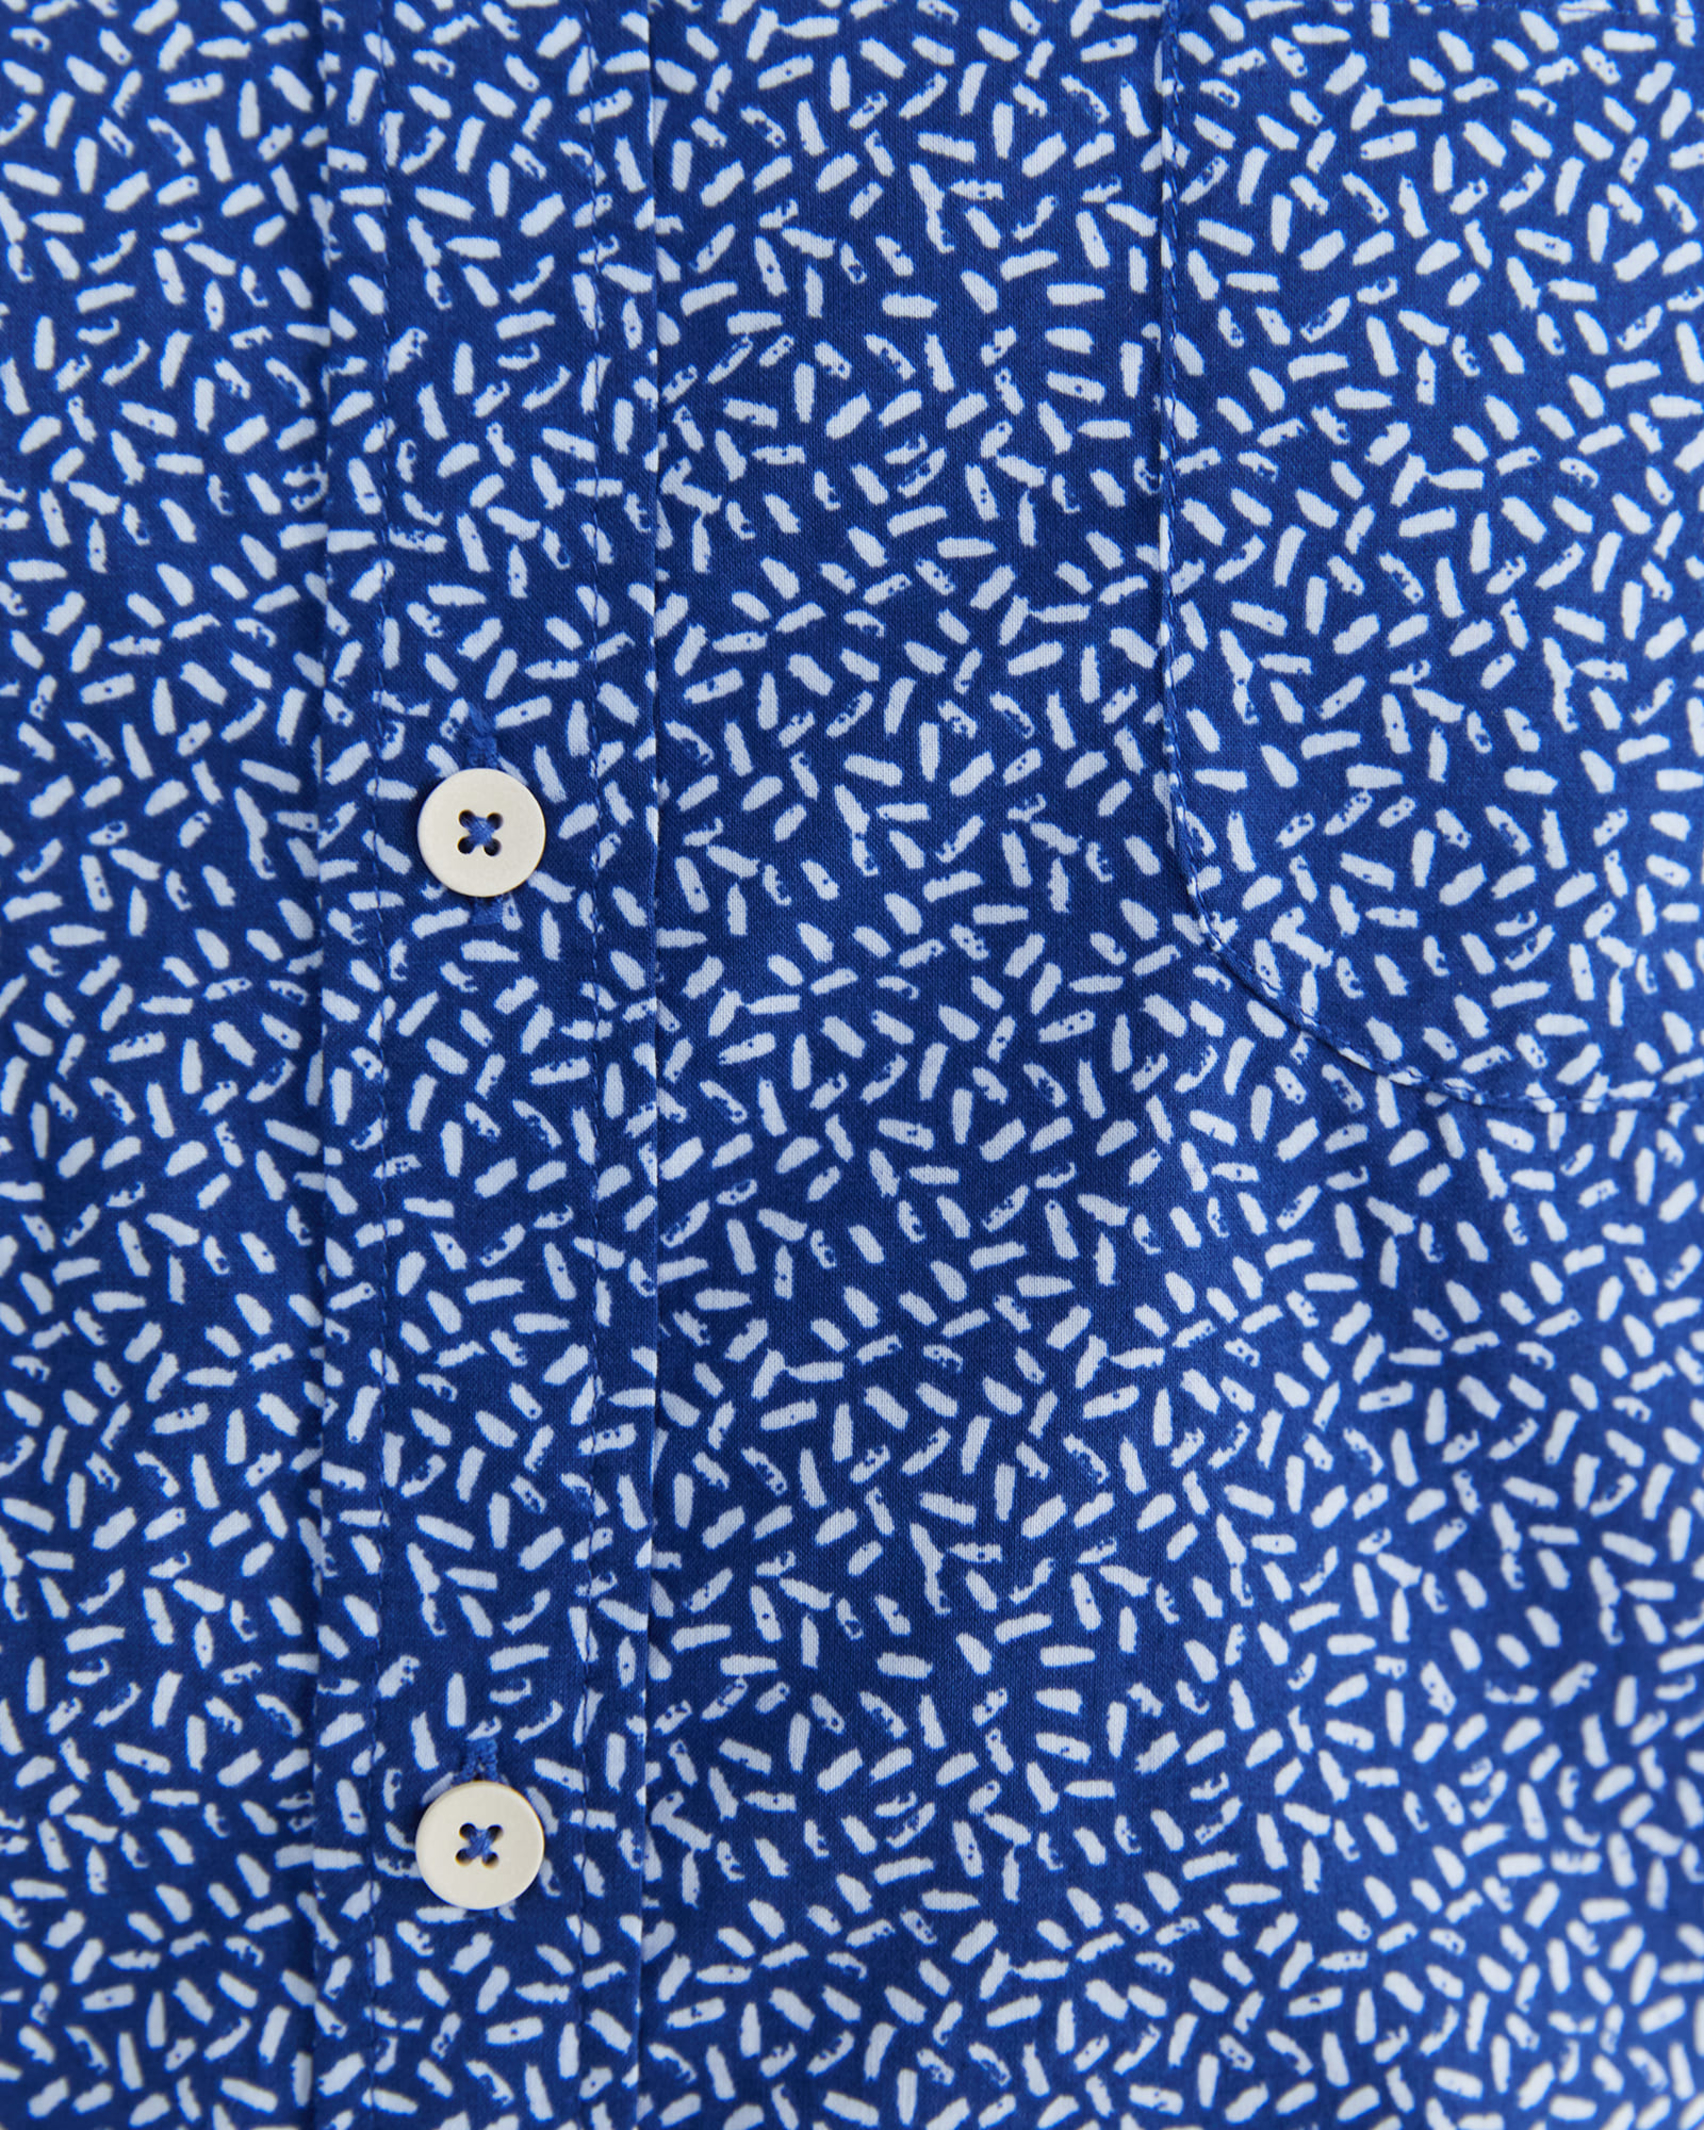 Parsons Short Sleeve Shirt in BLUE INK